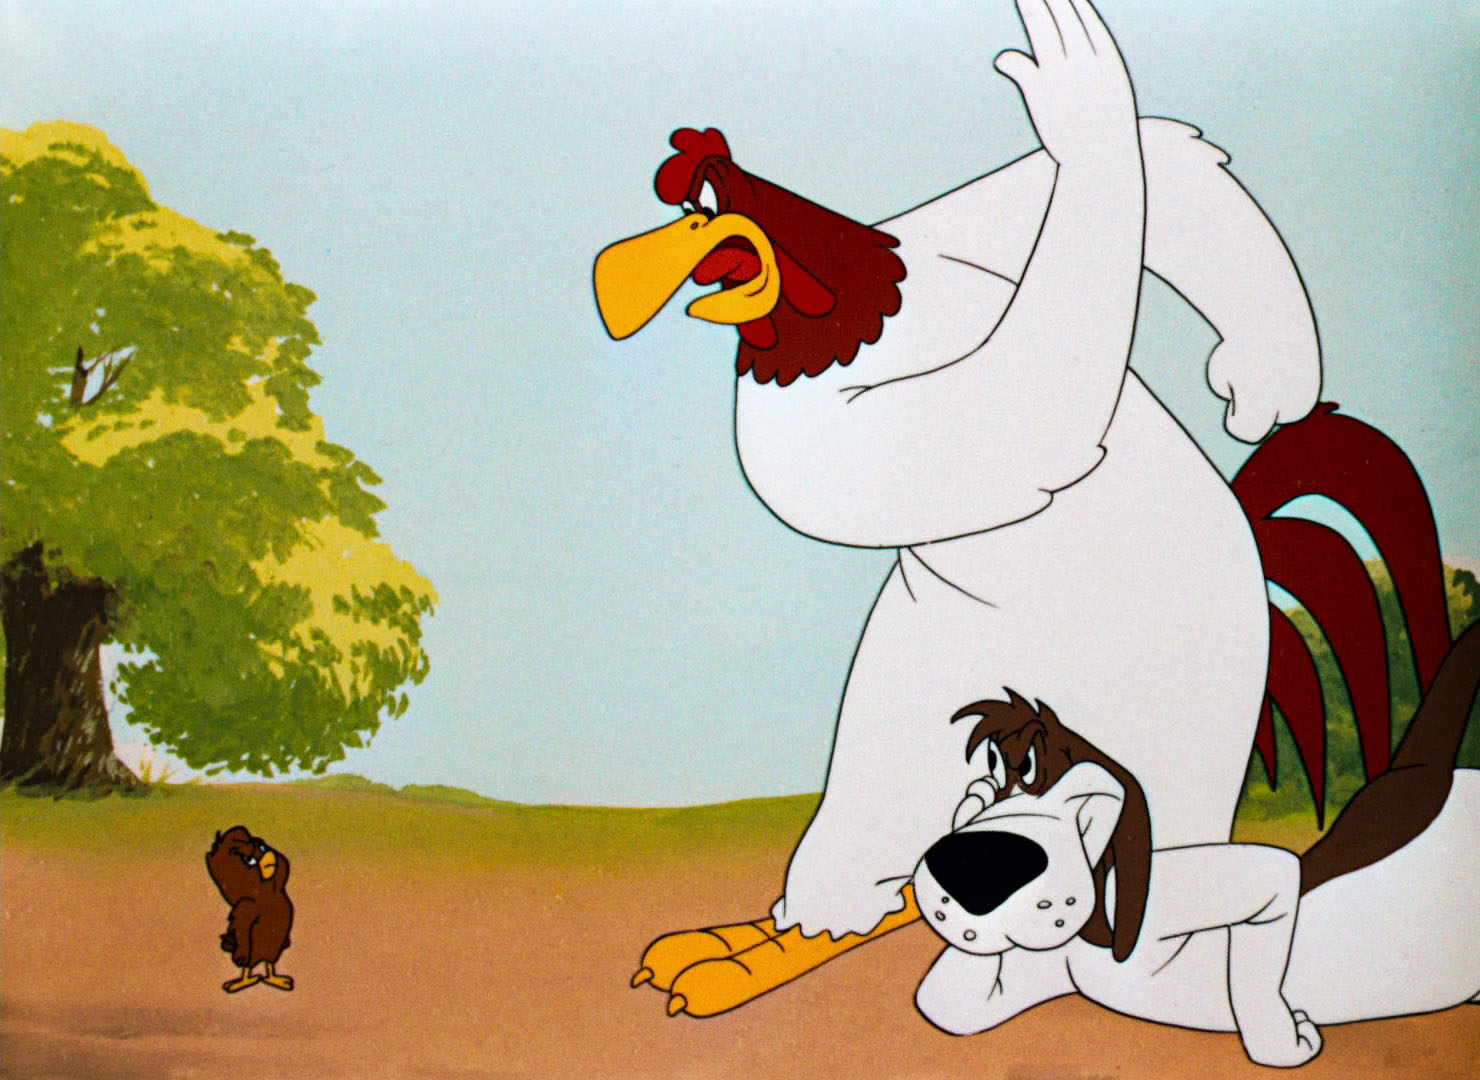 Looney Tunes Pictures: "The Foghorn Leghorn" .